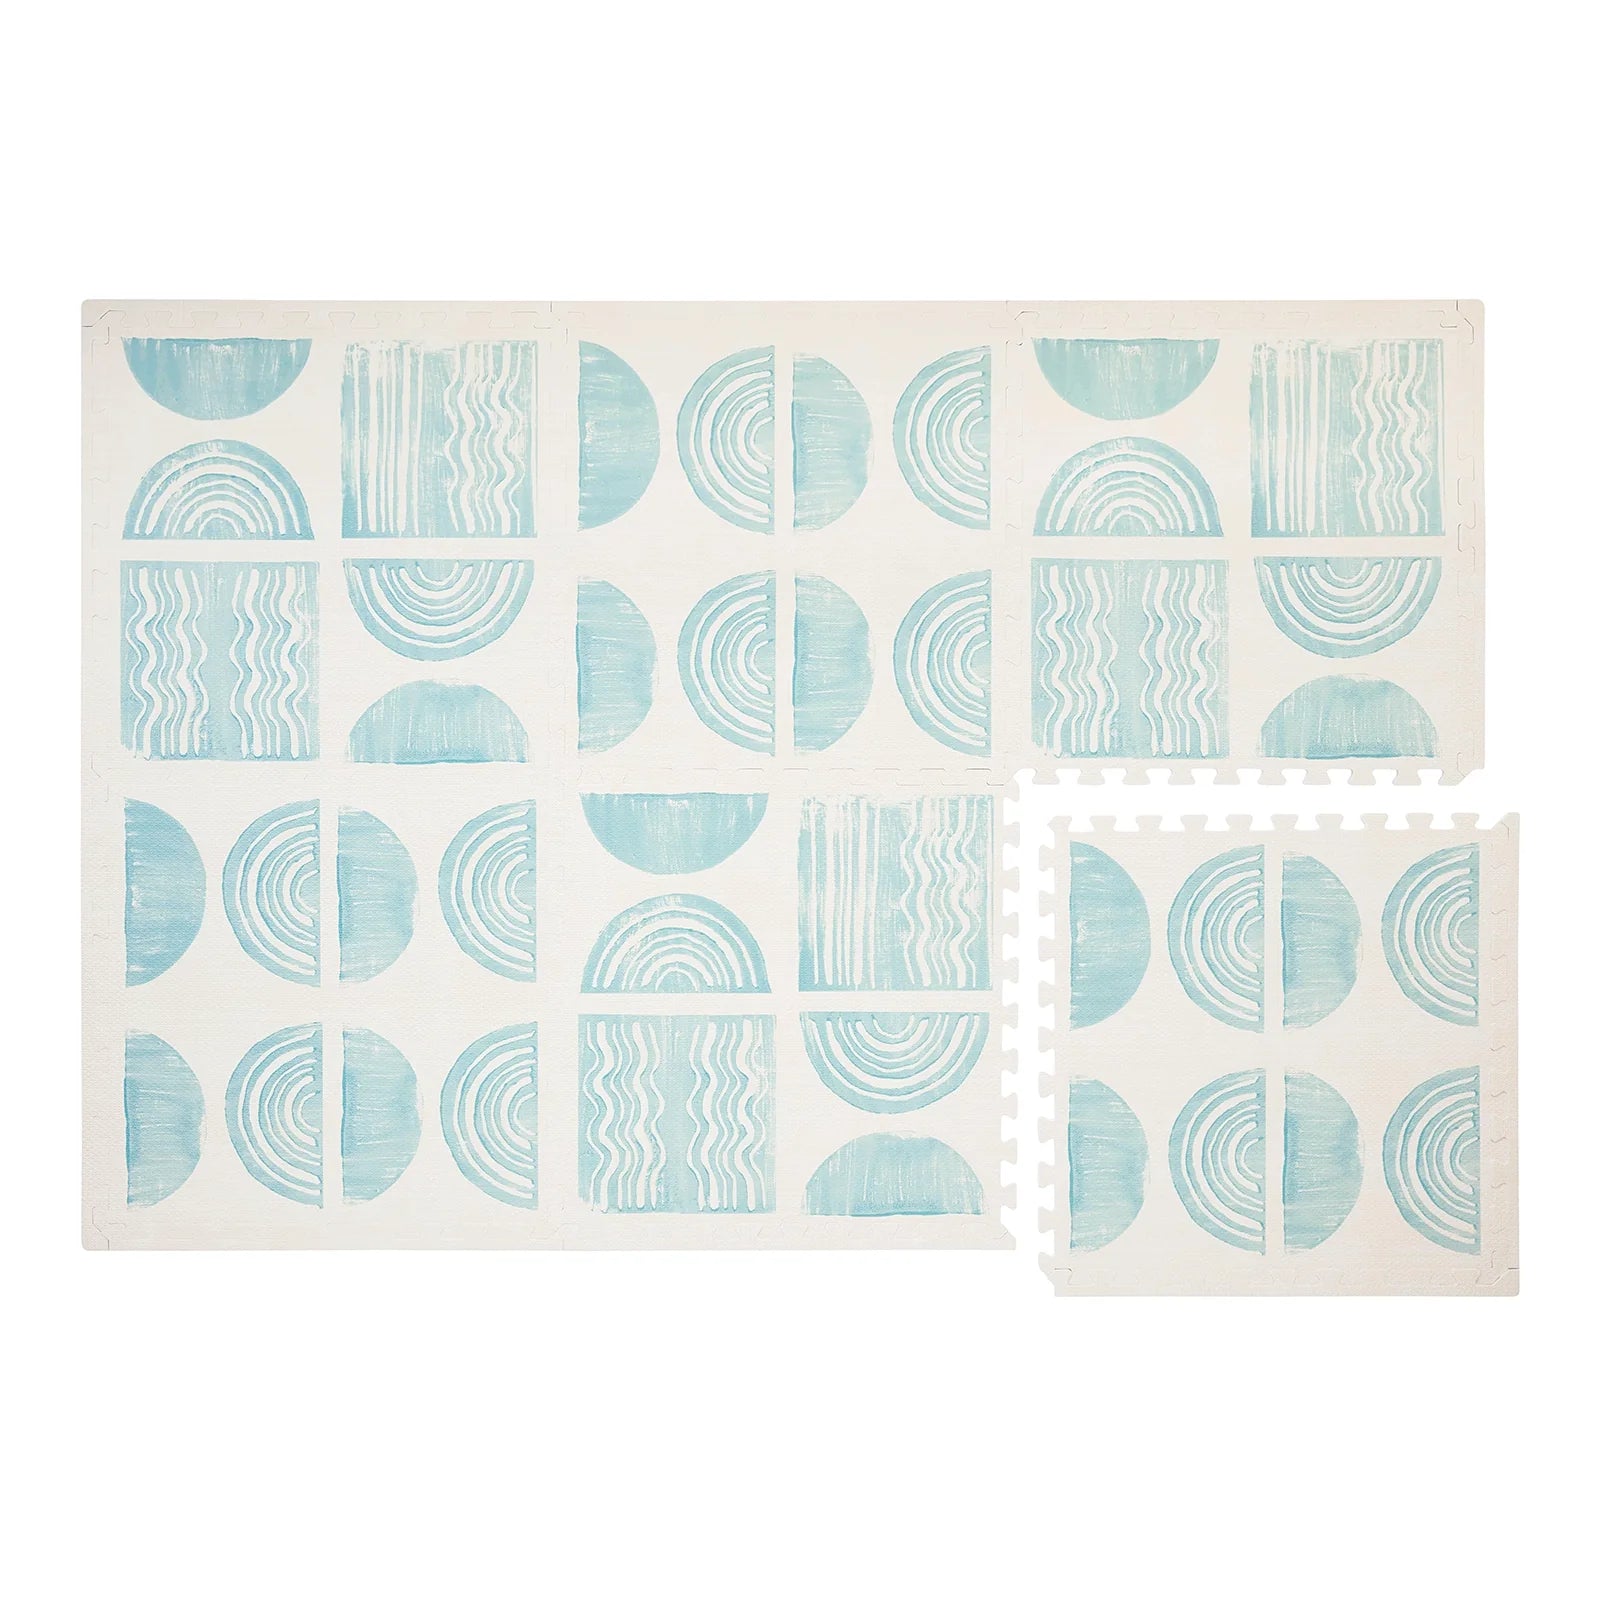 Overhead shot of the Ada modern minimalist baby play mat in Celadon, pale aqua blue and off white. Shown in size 4x6 with 1 tile separated